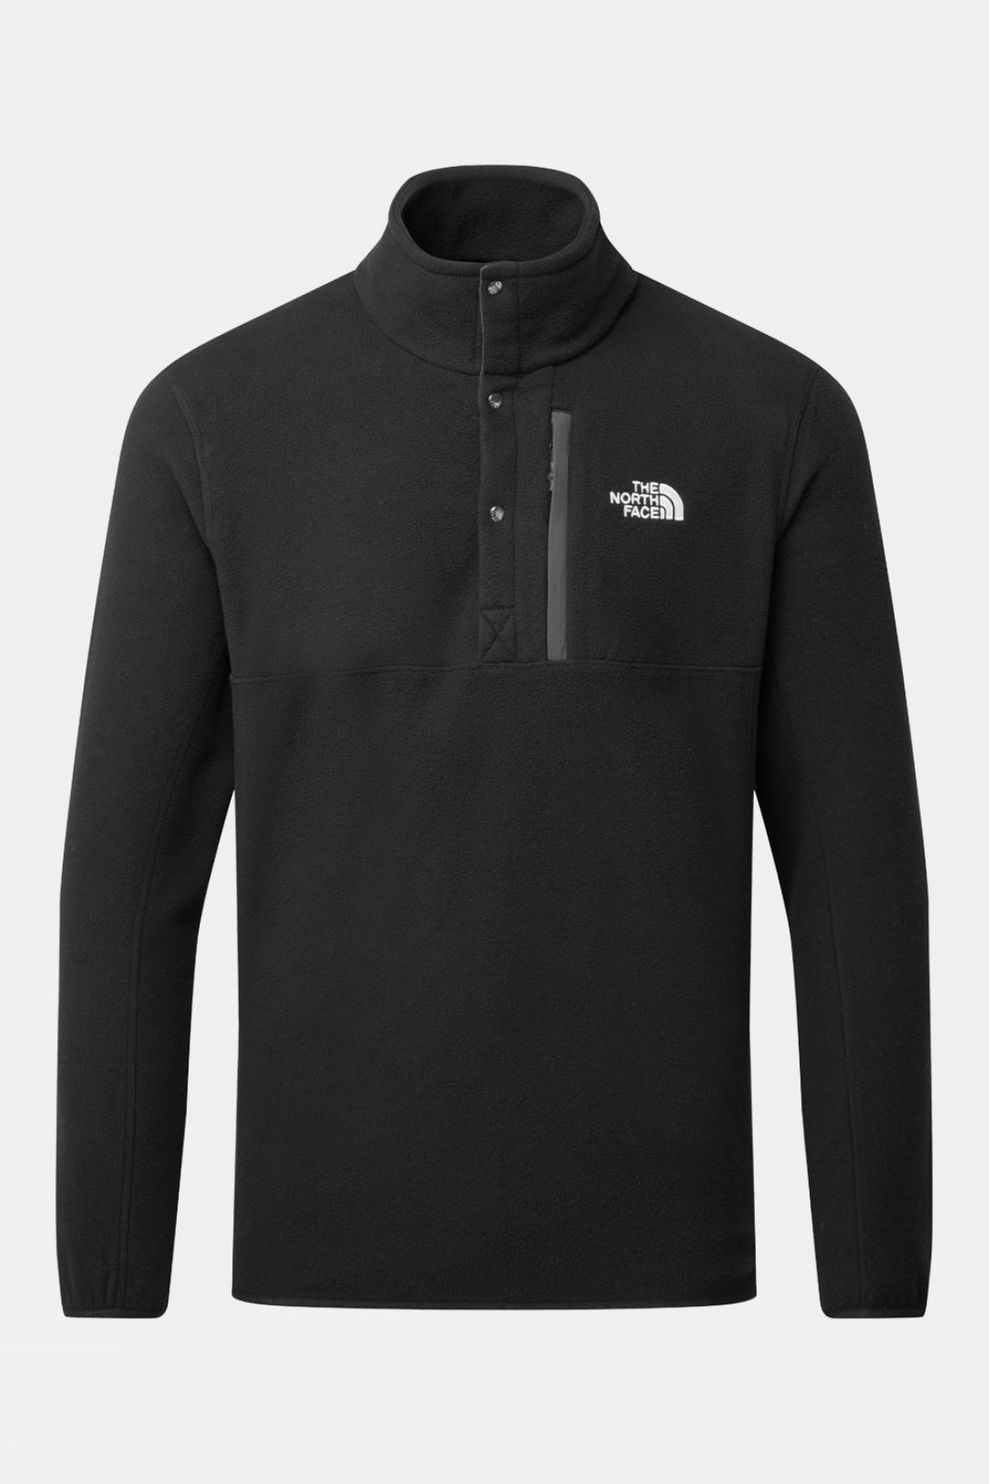 The North Face Mens Ryeford Snap Neck Fleece